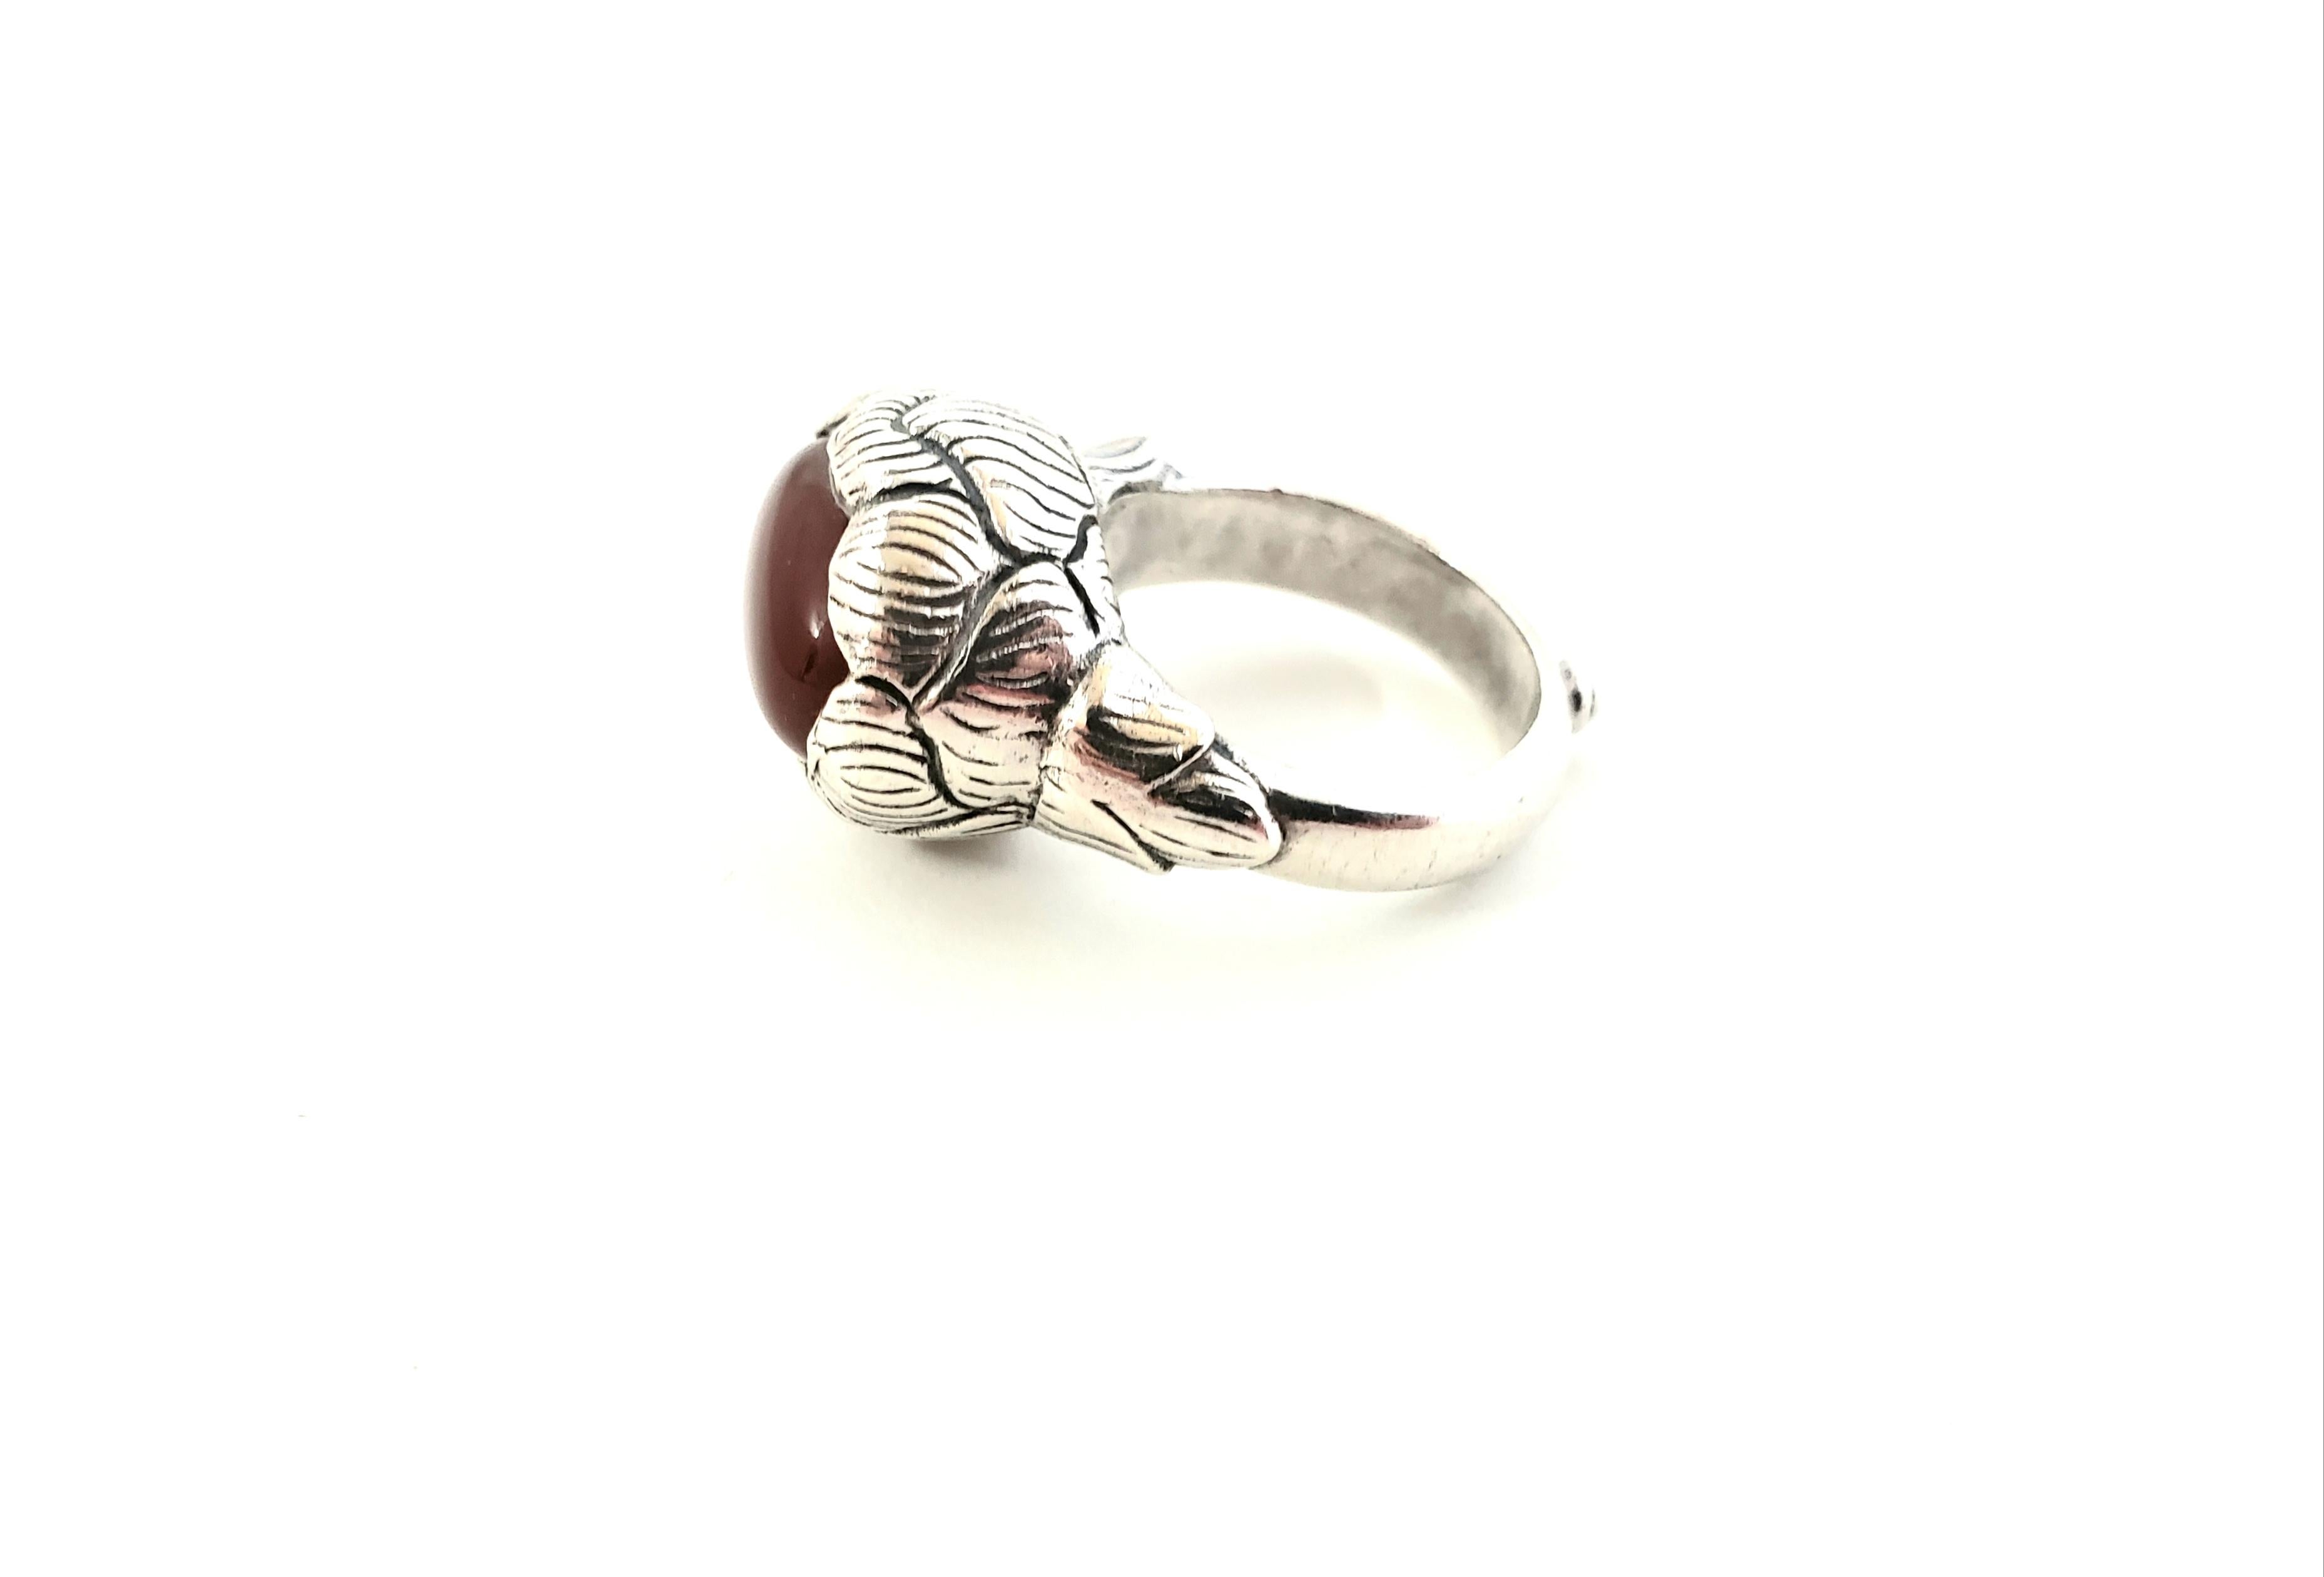 Janice Girardi JGD Sterling Silver Carnelian Lotus Ring

This is a beautiful sterling silver Carnelian Lotus Ring designed by Jane Girardi.

Measurements:   Size  6 3/4; 9/16